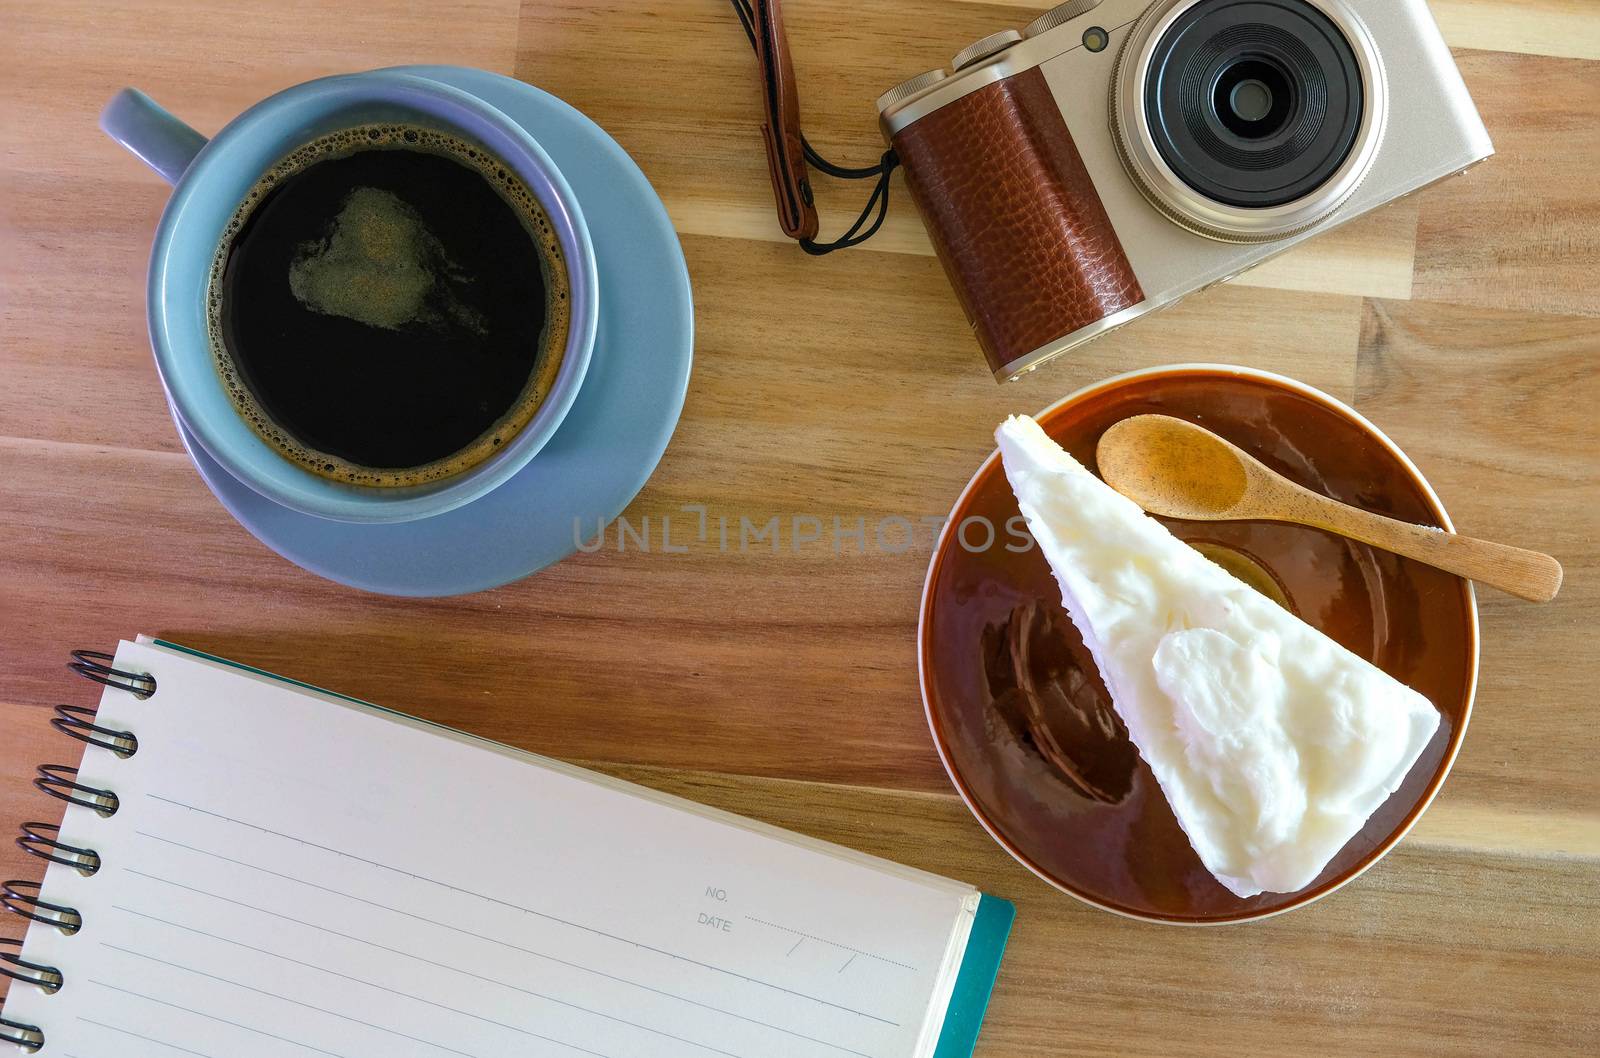 notebook, camera, coffee, coconut cake on wooden background by Bonn2210